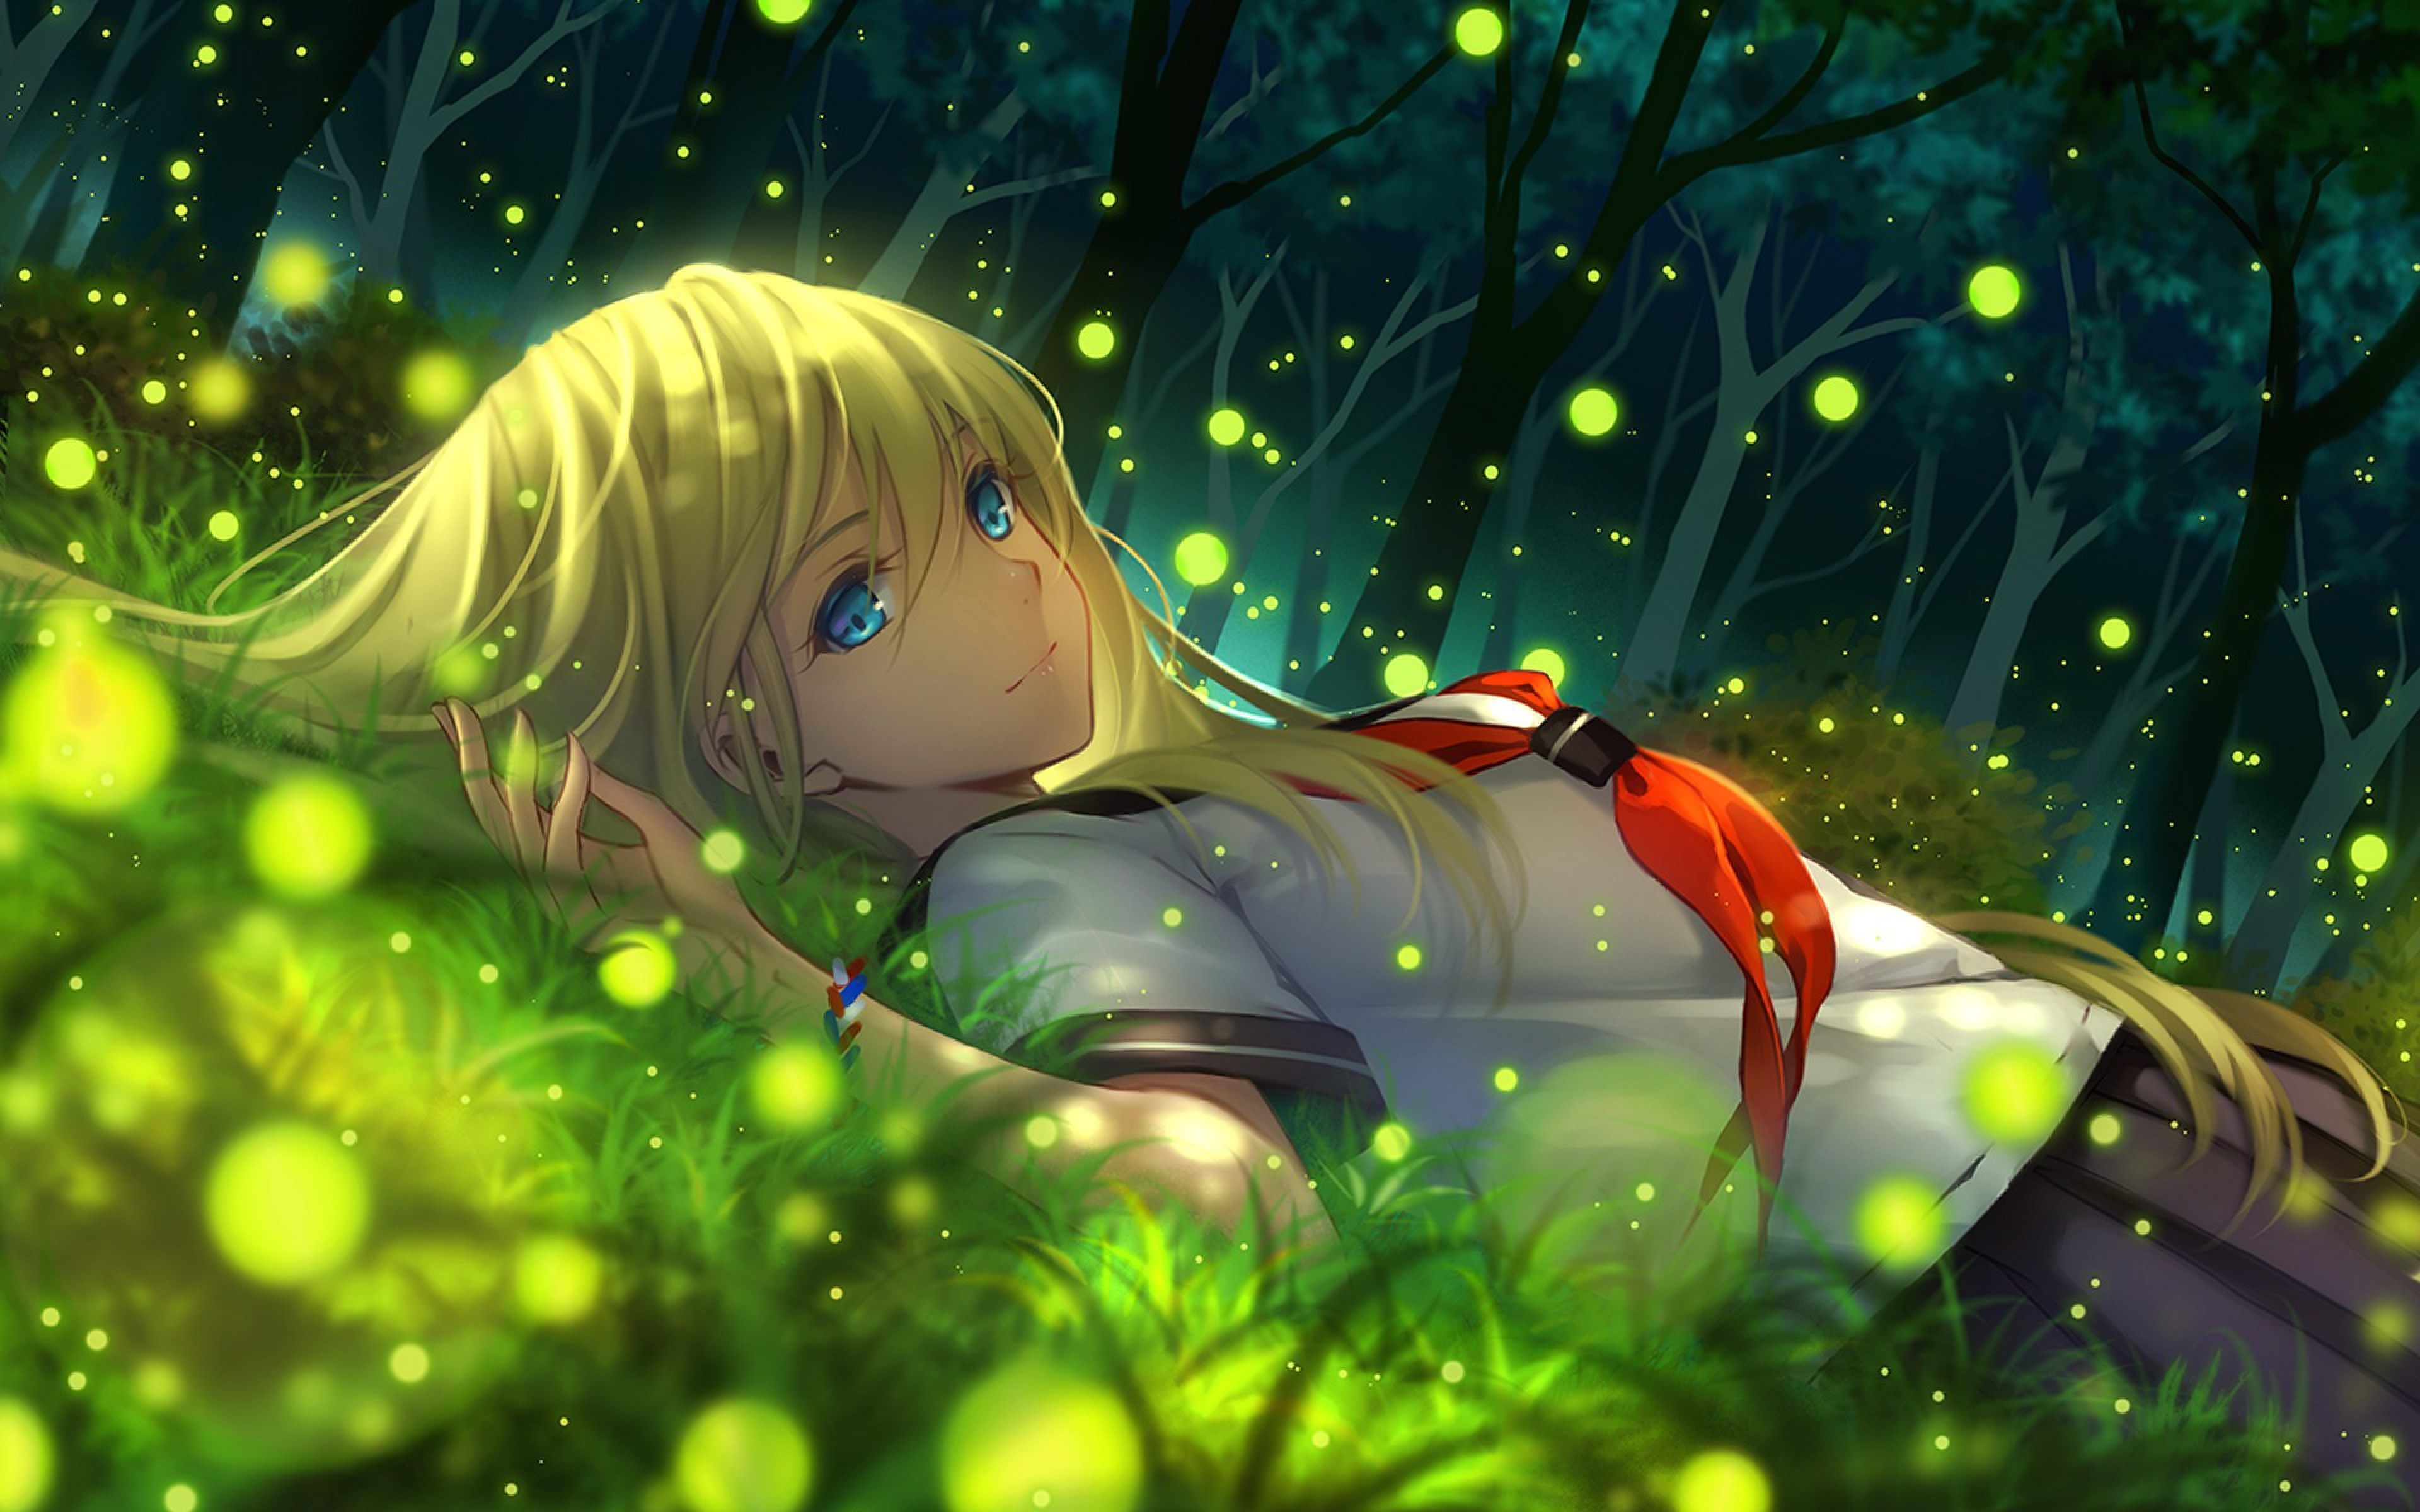 Beautiful Anime Girl Wallpapers posted by Michelle Peltier